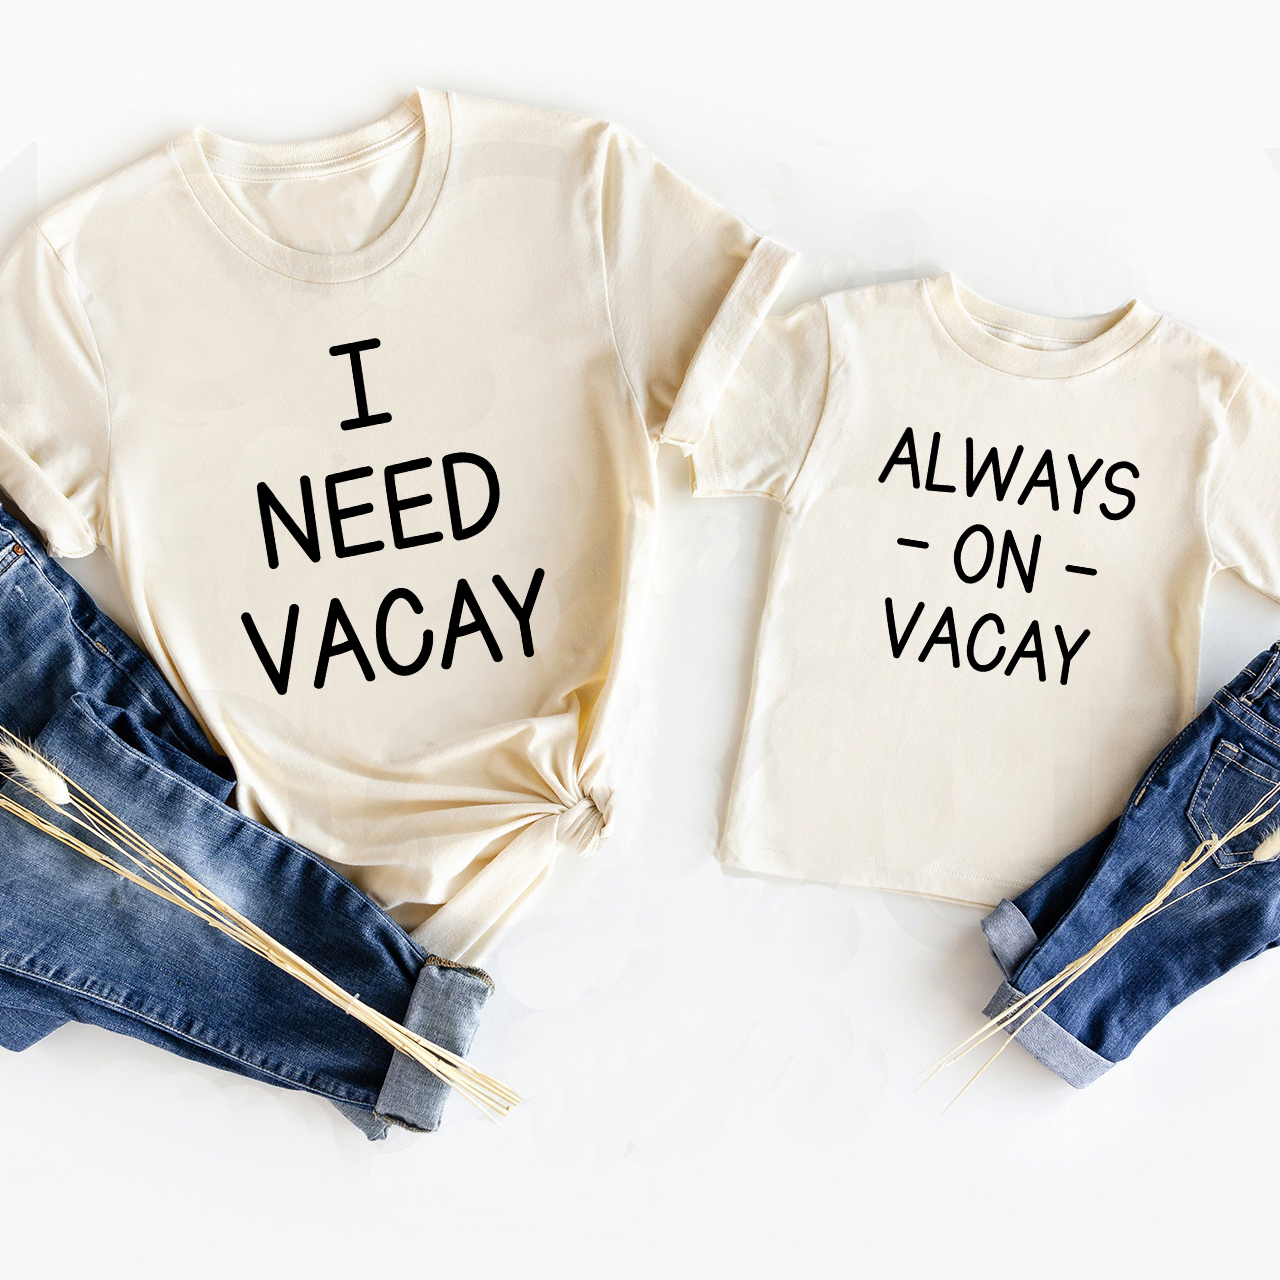 I Need Vacay Matching Tees For Mother's Day